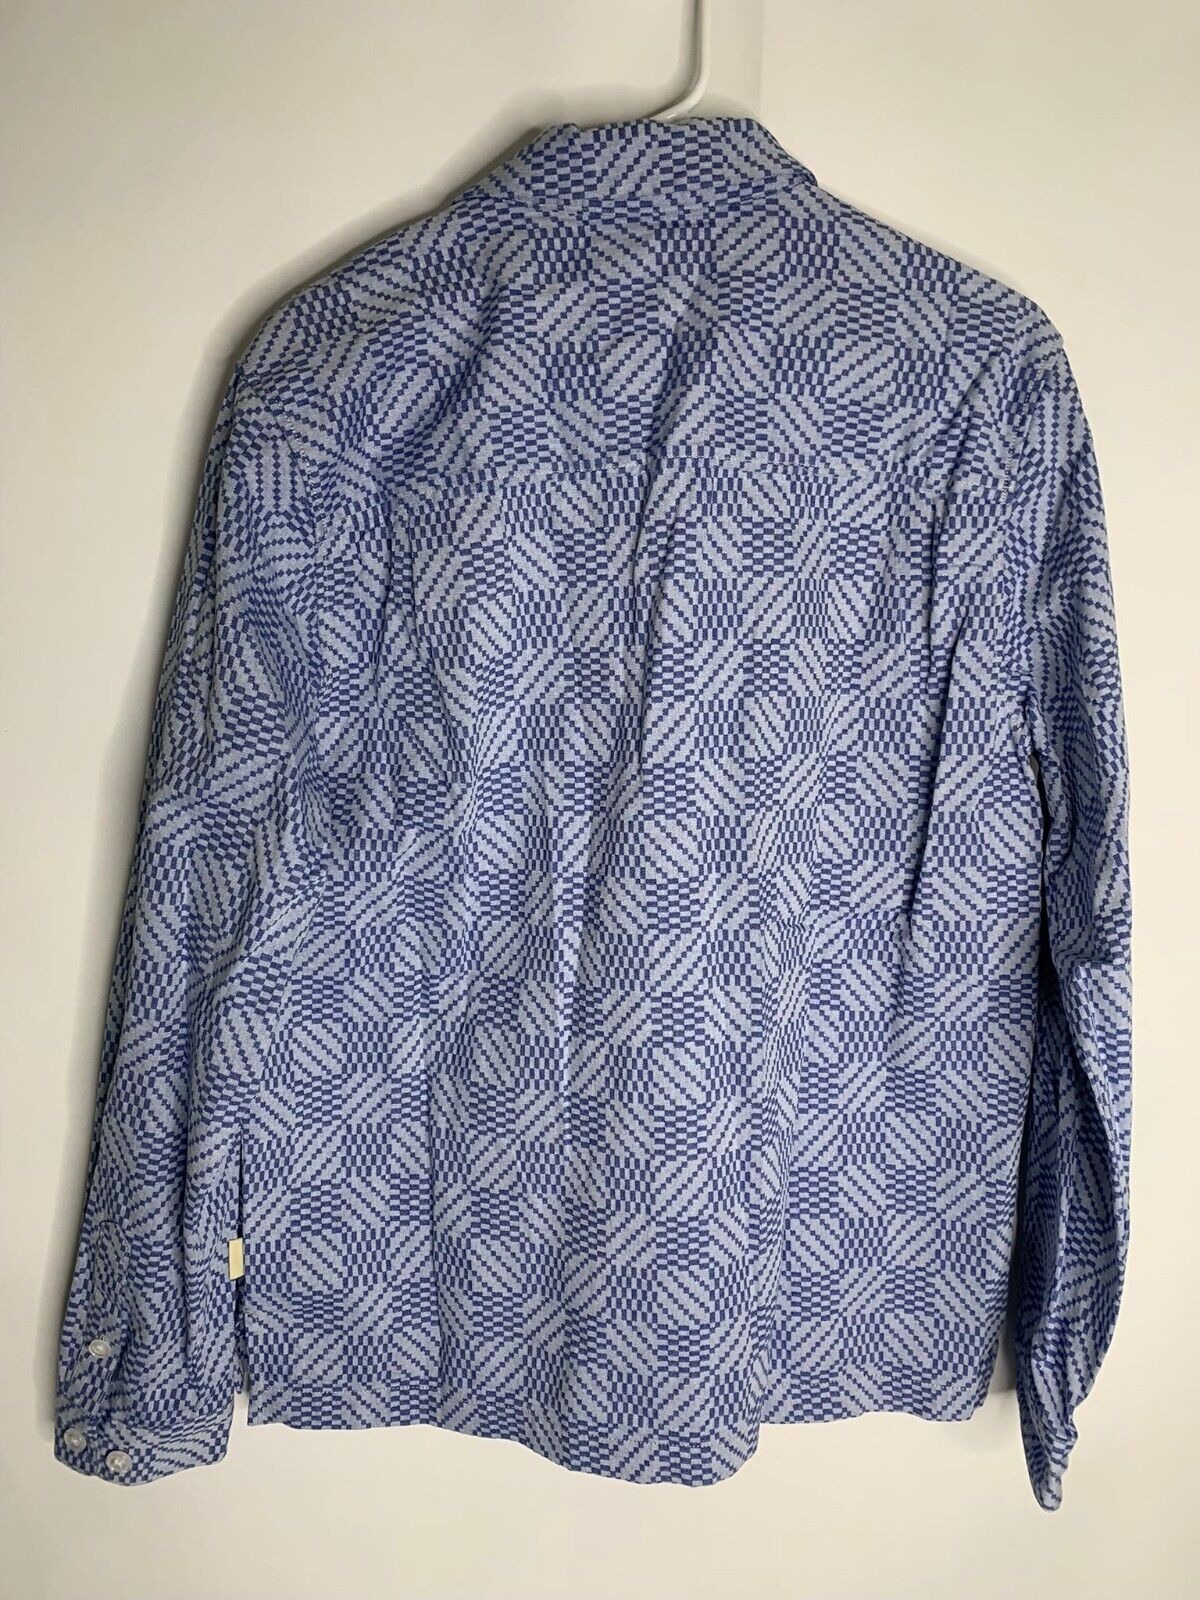 Urban Outfitters Mens S Blue Geometric Twill Button Down Over Shirt Jacket